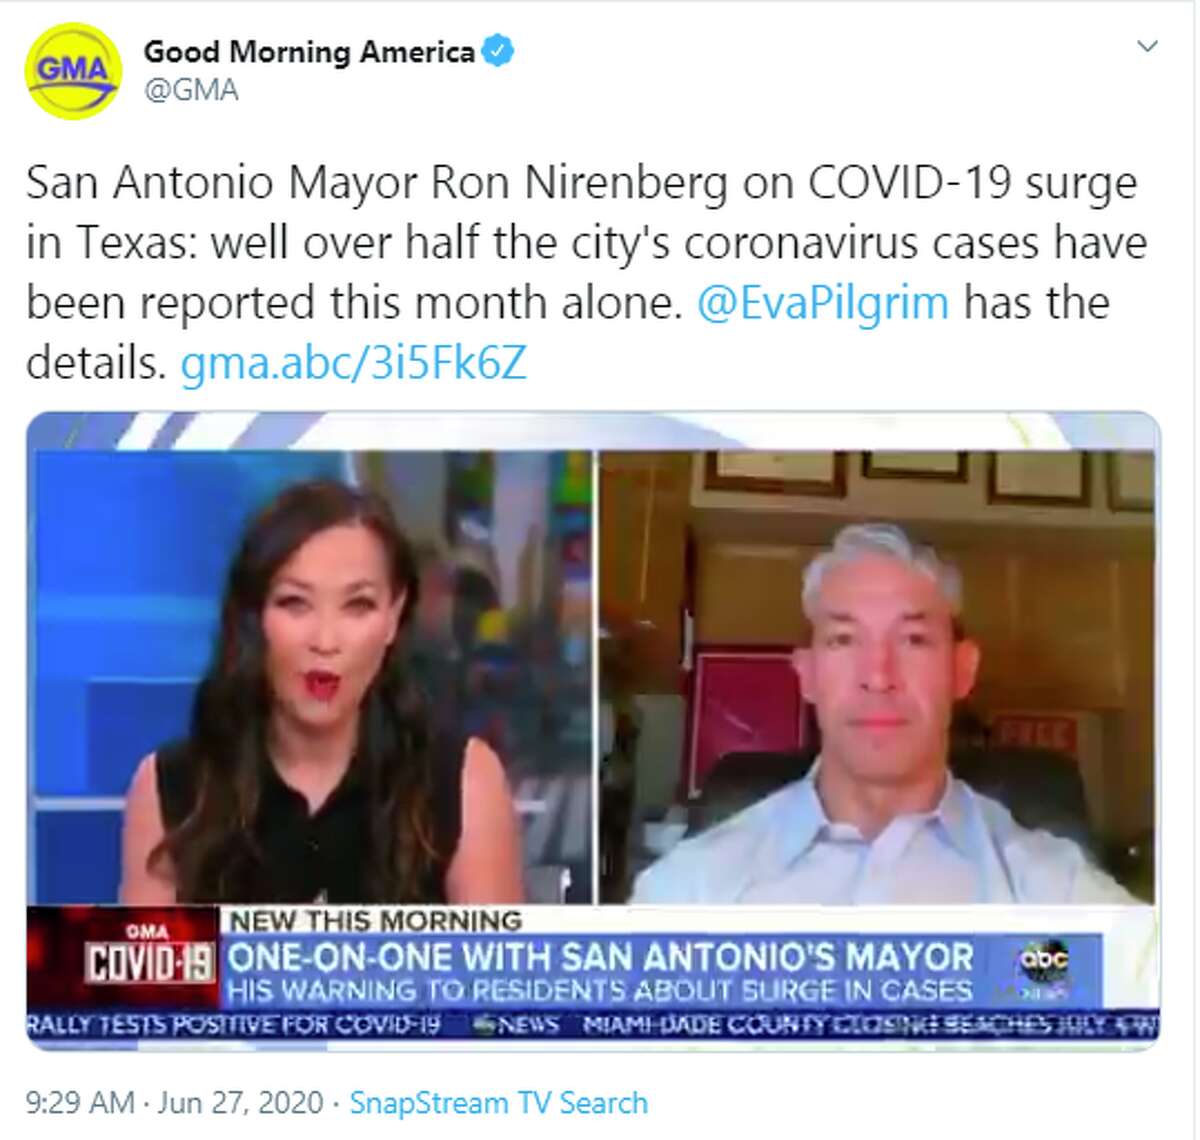 San Antonio Mayor Ron Nirenberg discussed the "stark" change in the city's COVID-19 status on "Good Morning America" over the weekend.